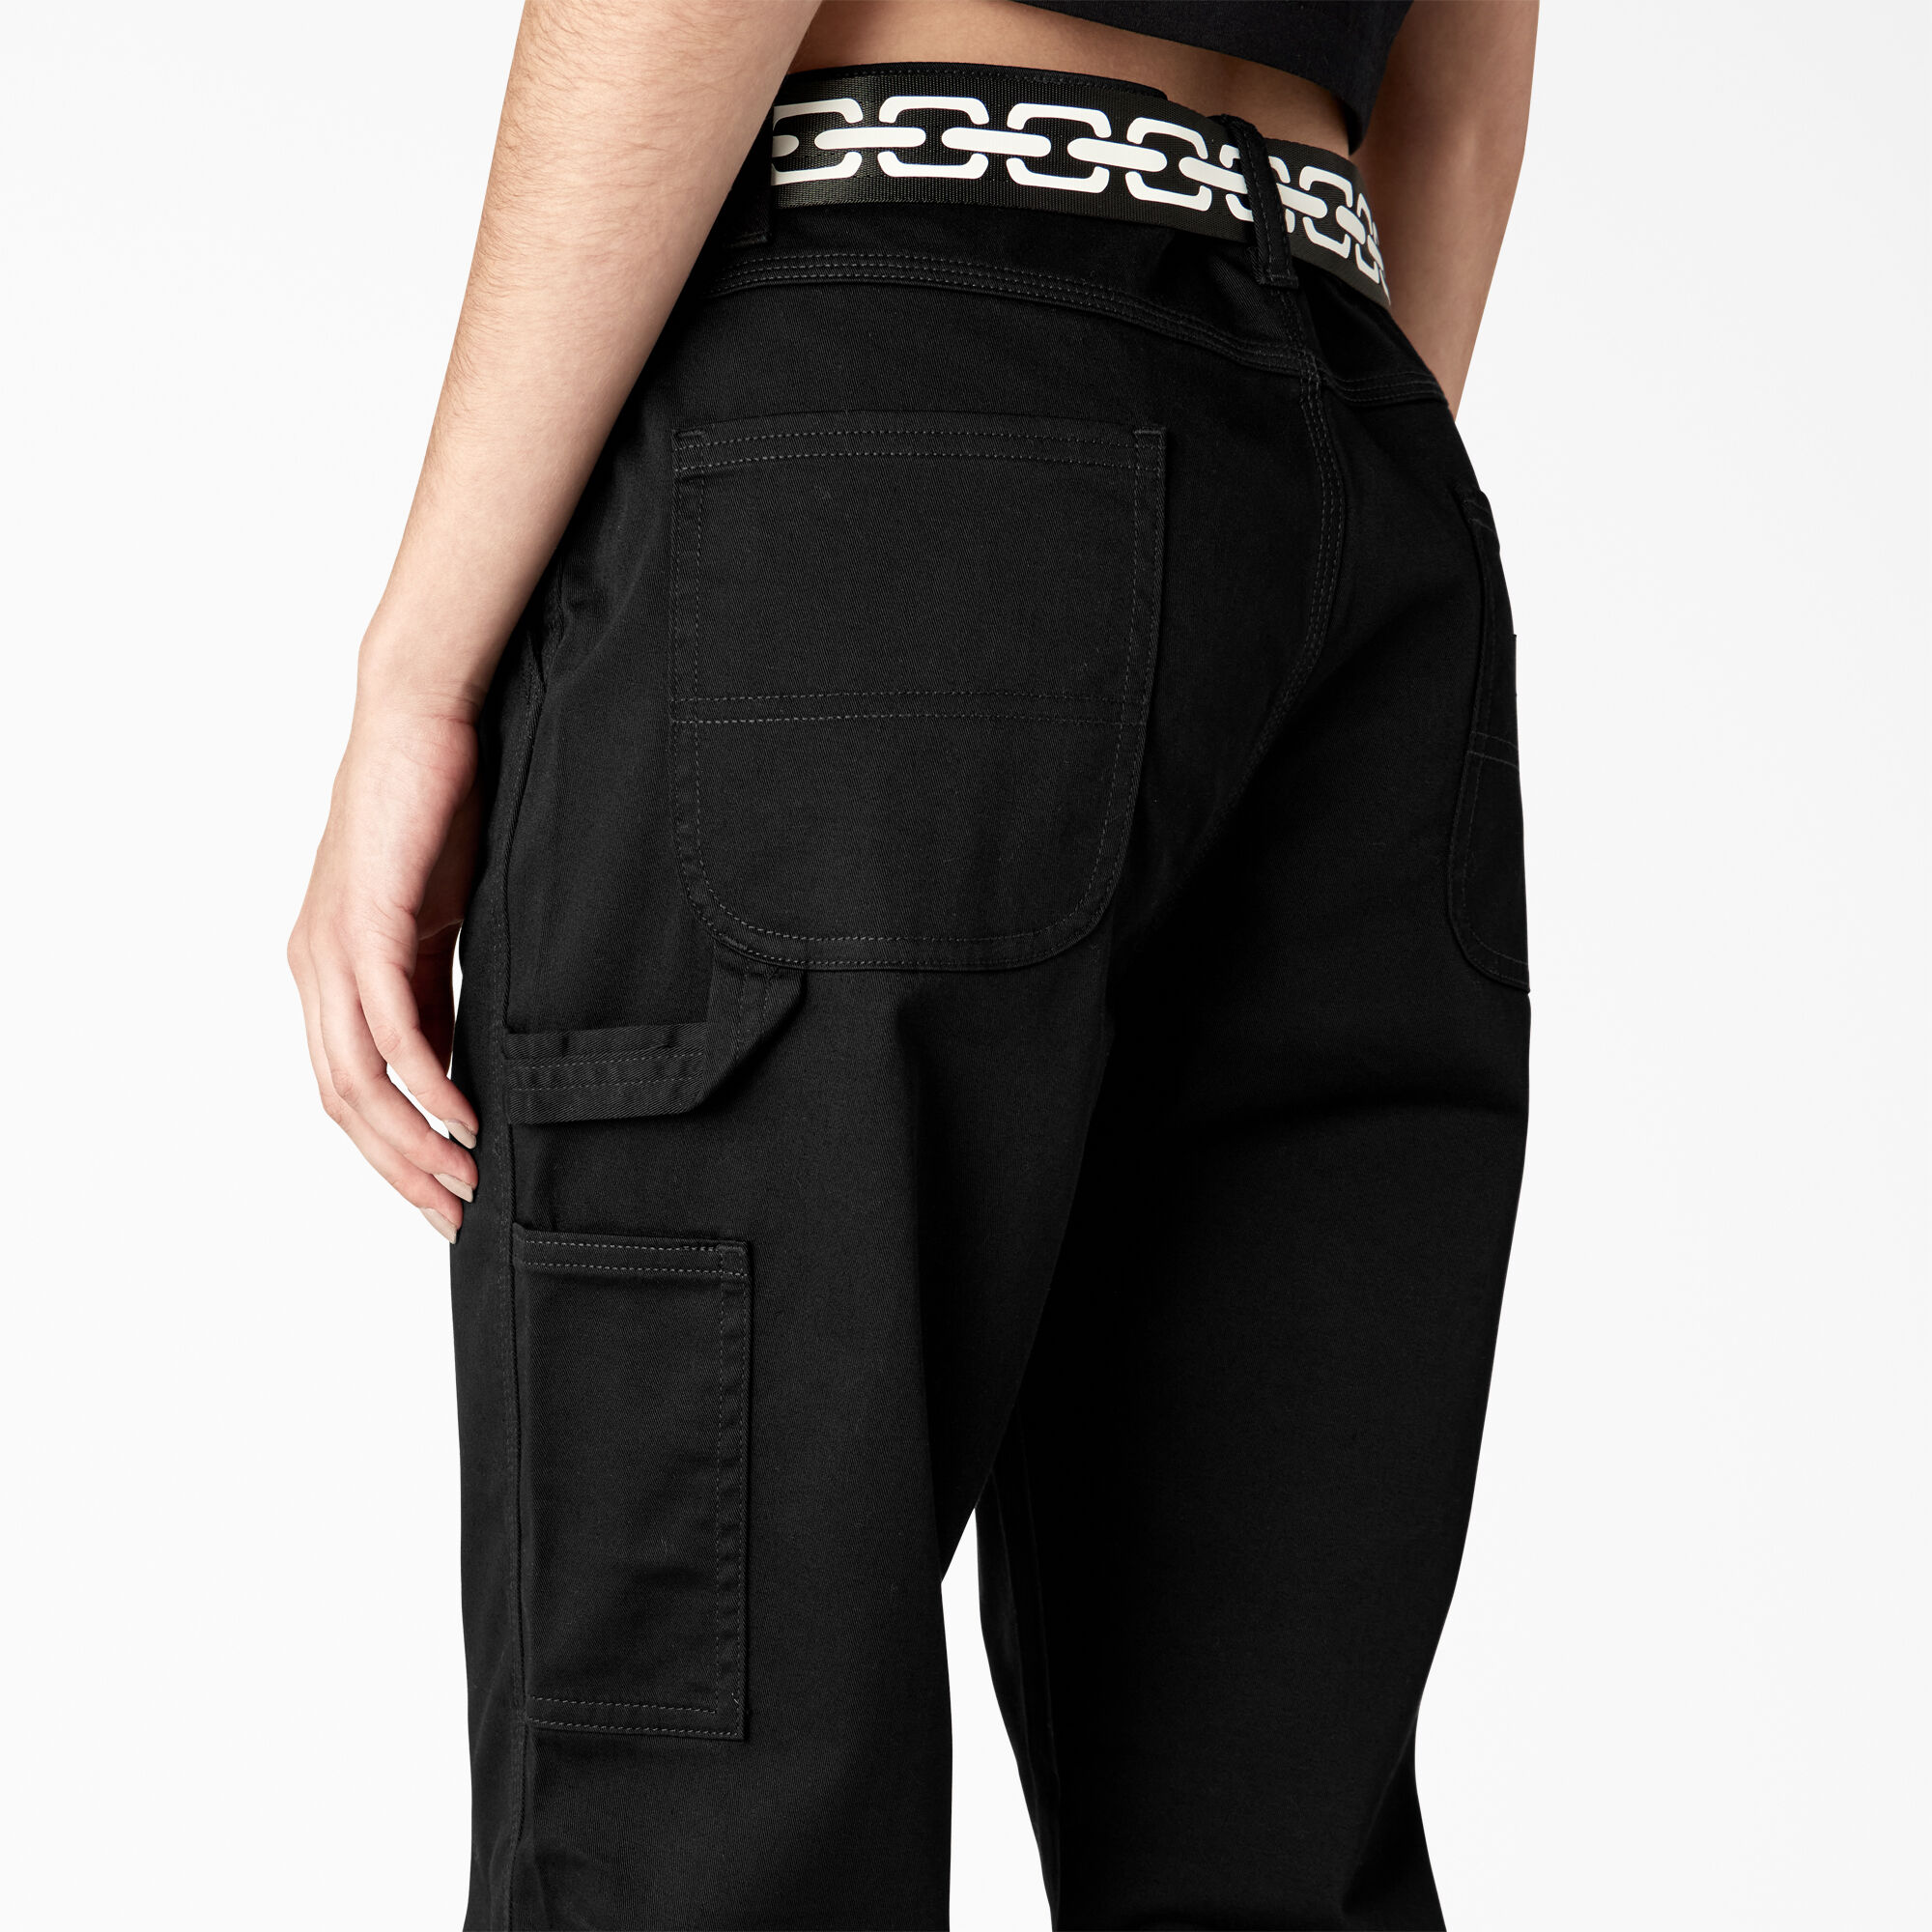 Dickies x Lurking Class Relaxed Fit Women’s Pants - Dickies US, Black